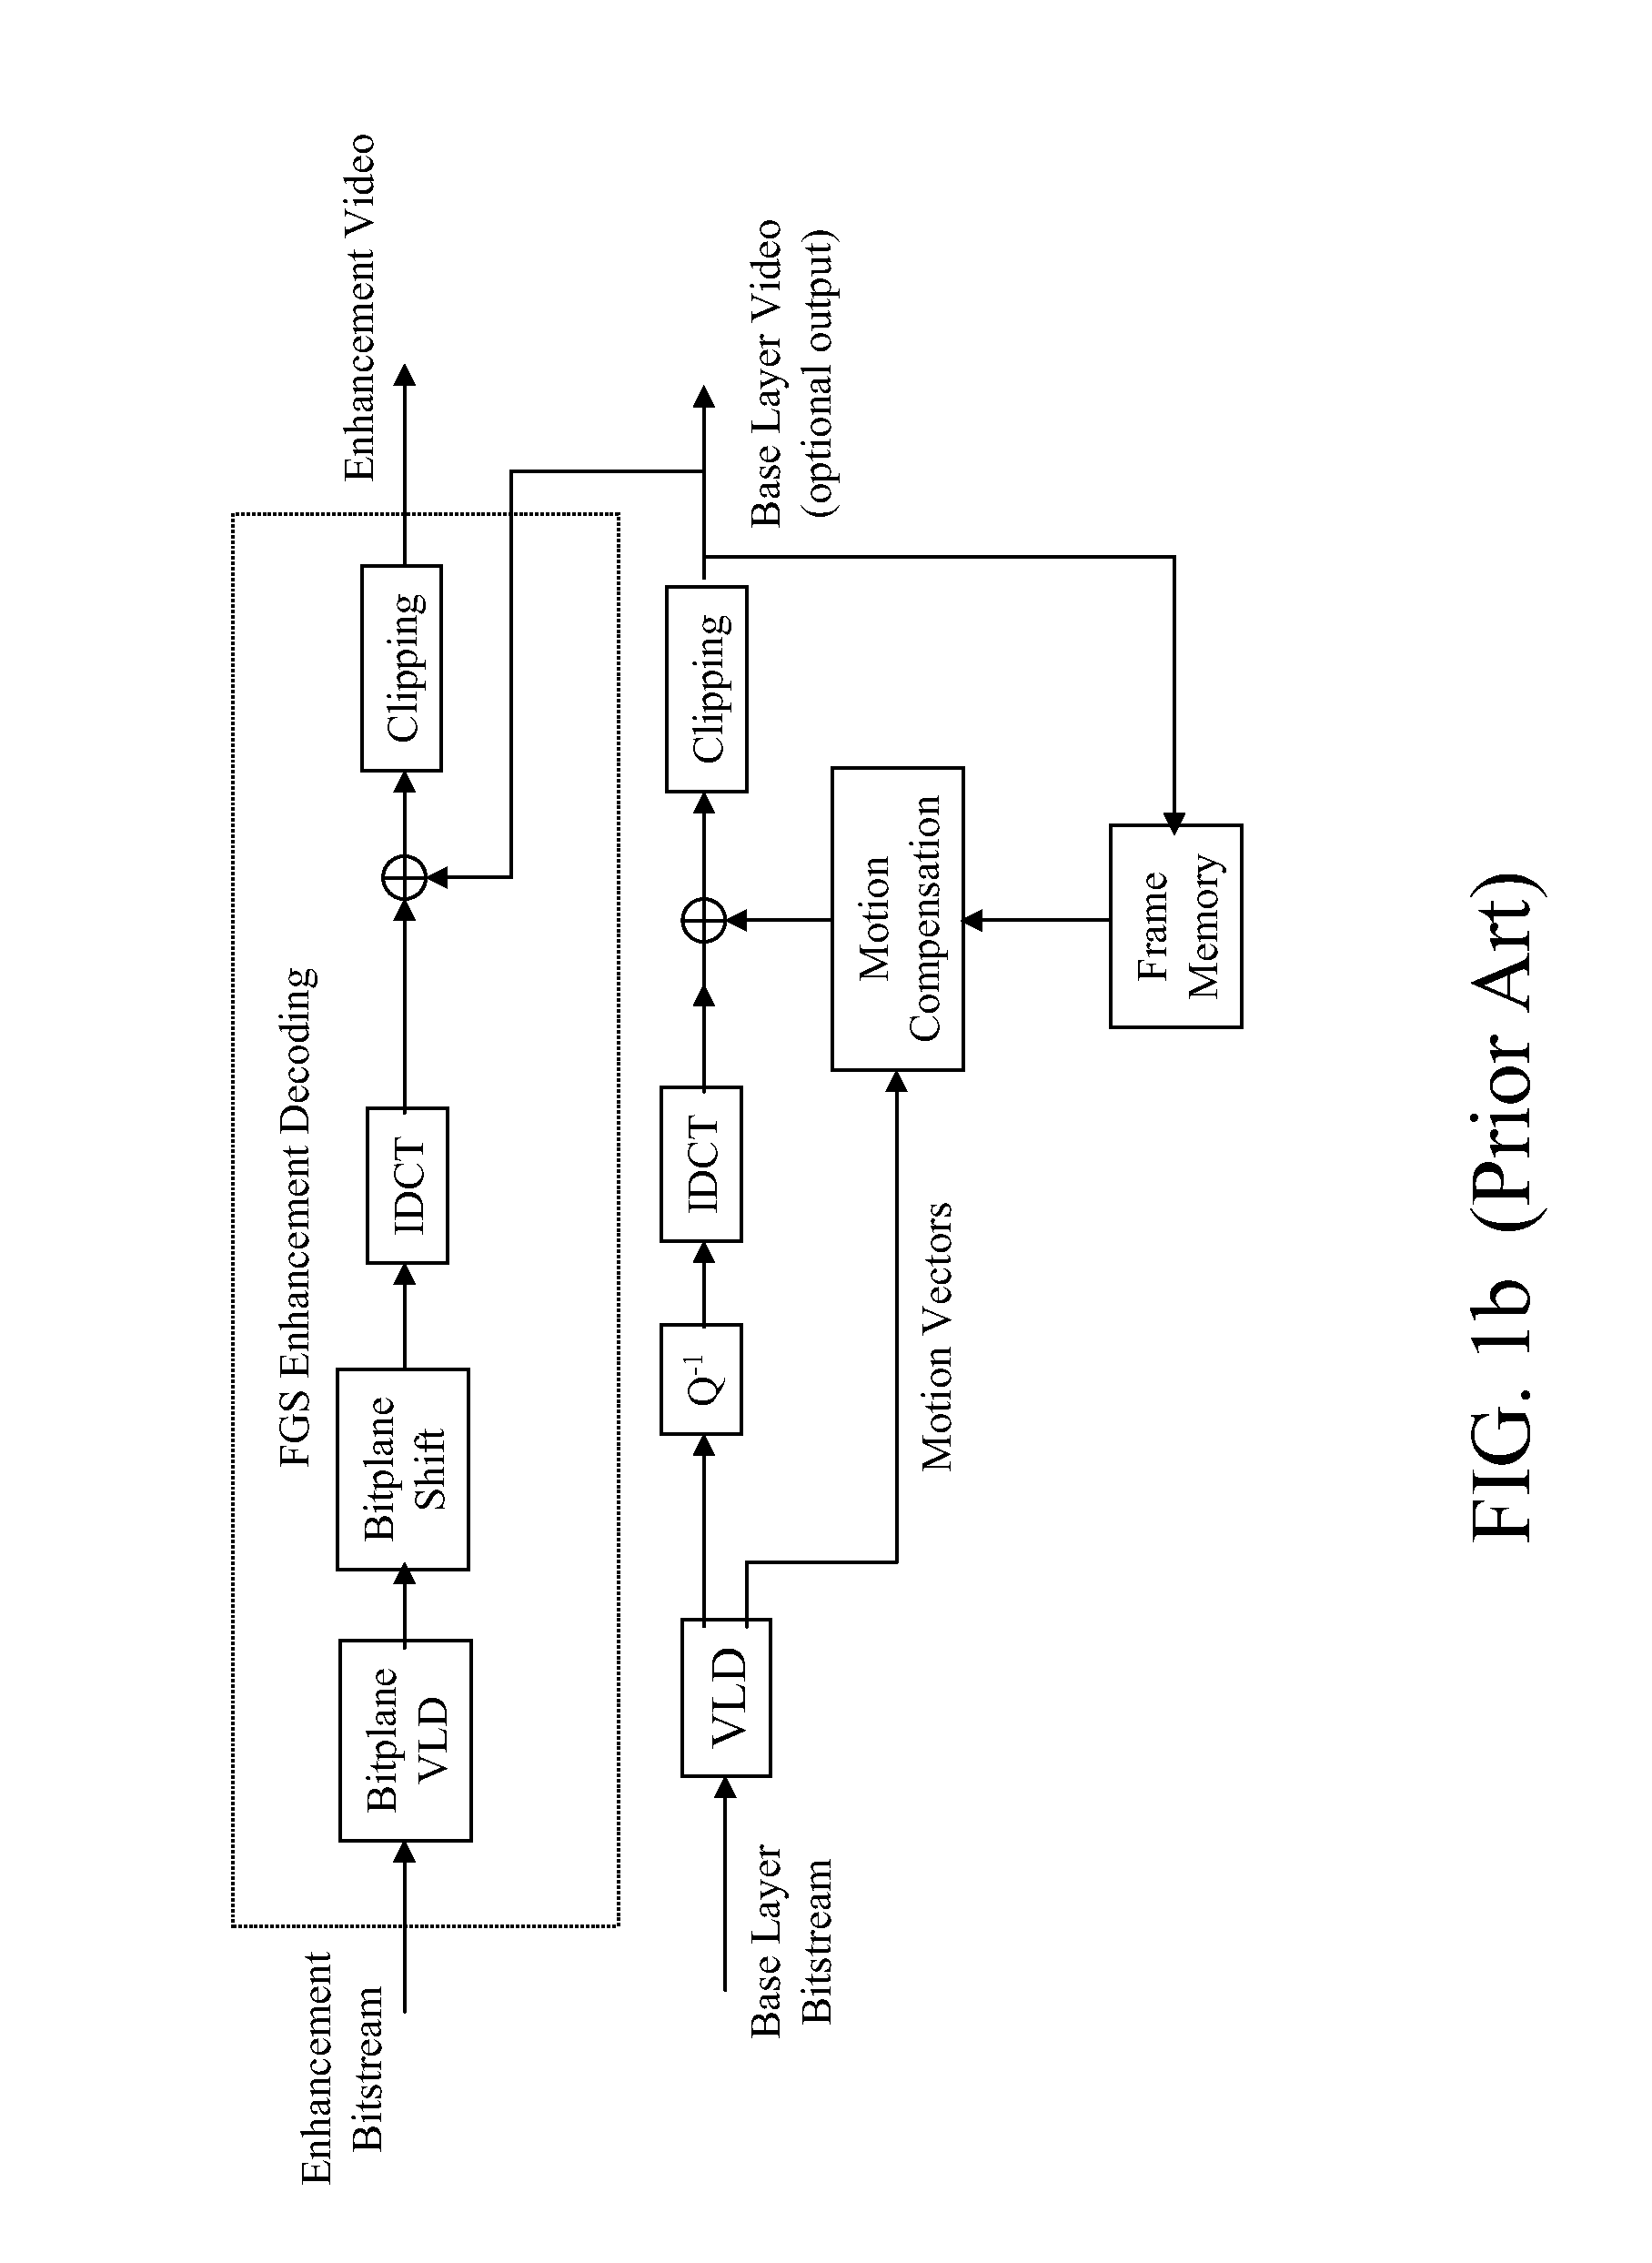 Architecture and method for fine granularity scalable video coding